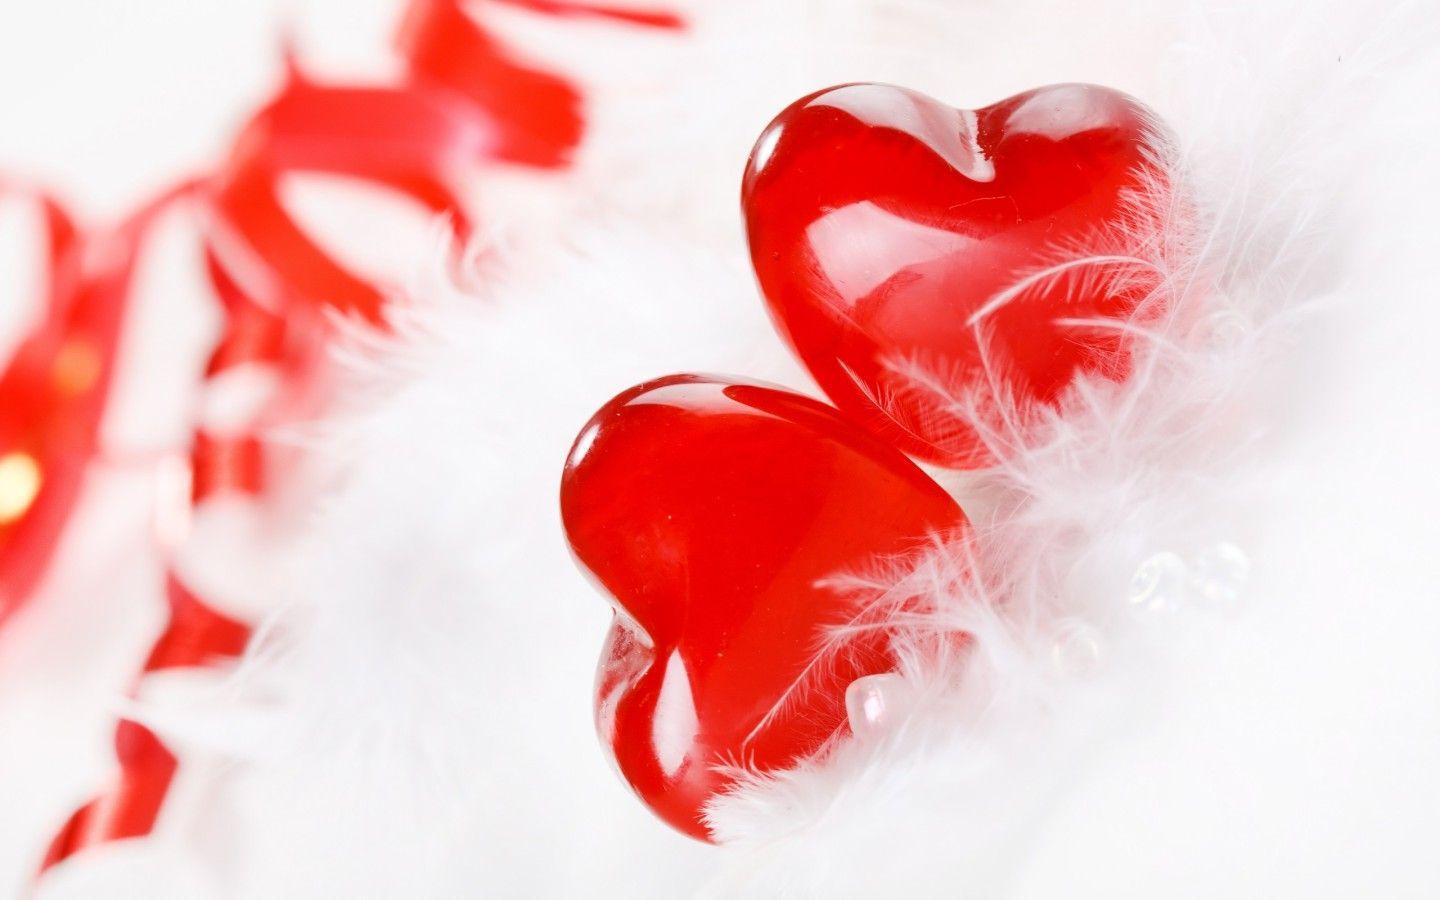 Red Hearts in White Feathers widescreen wallpaper. Wide